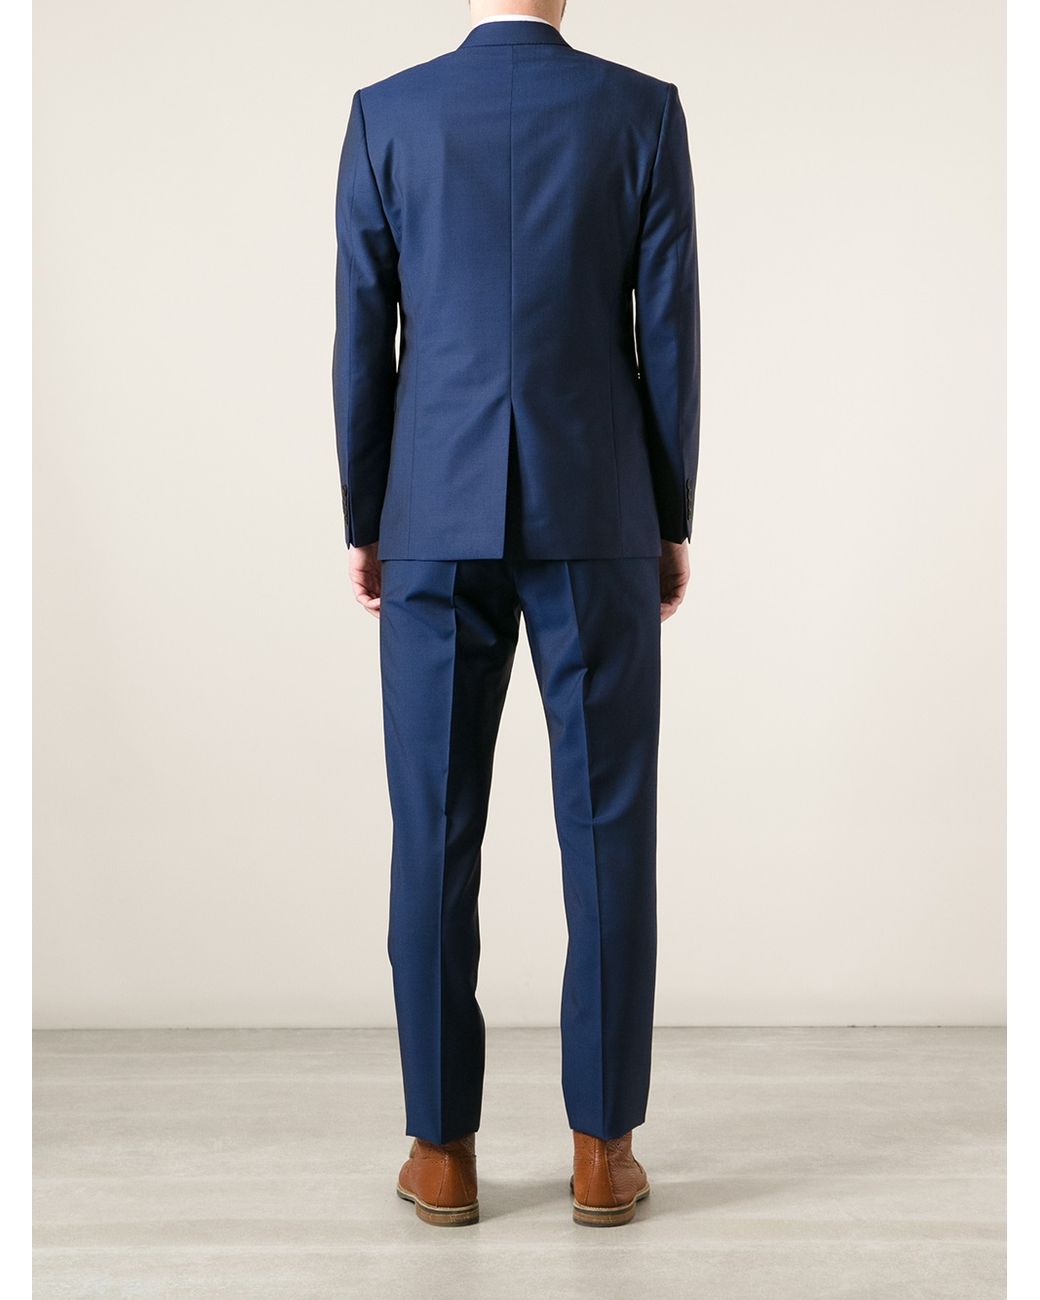 Paul Smith  Navy Soho SlimFit Puppytooth Wool Suit Trousers  Men  Navy Paul  Smith